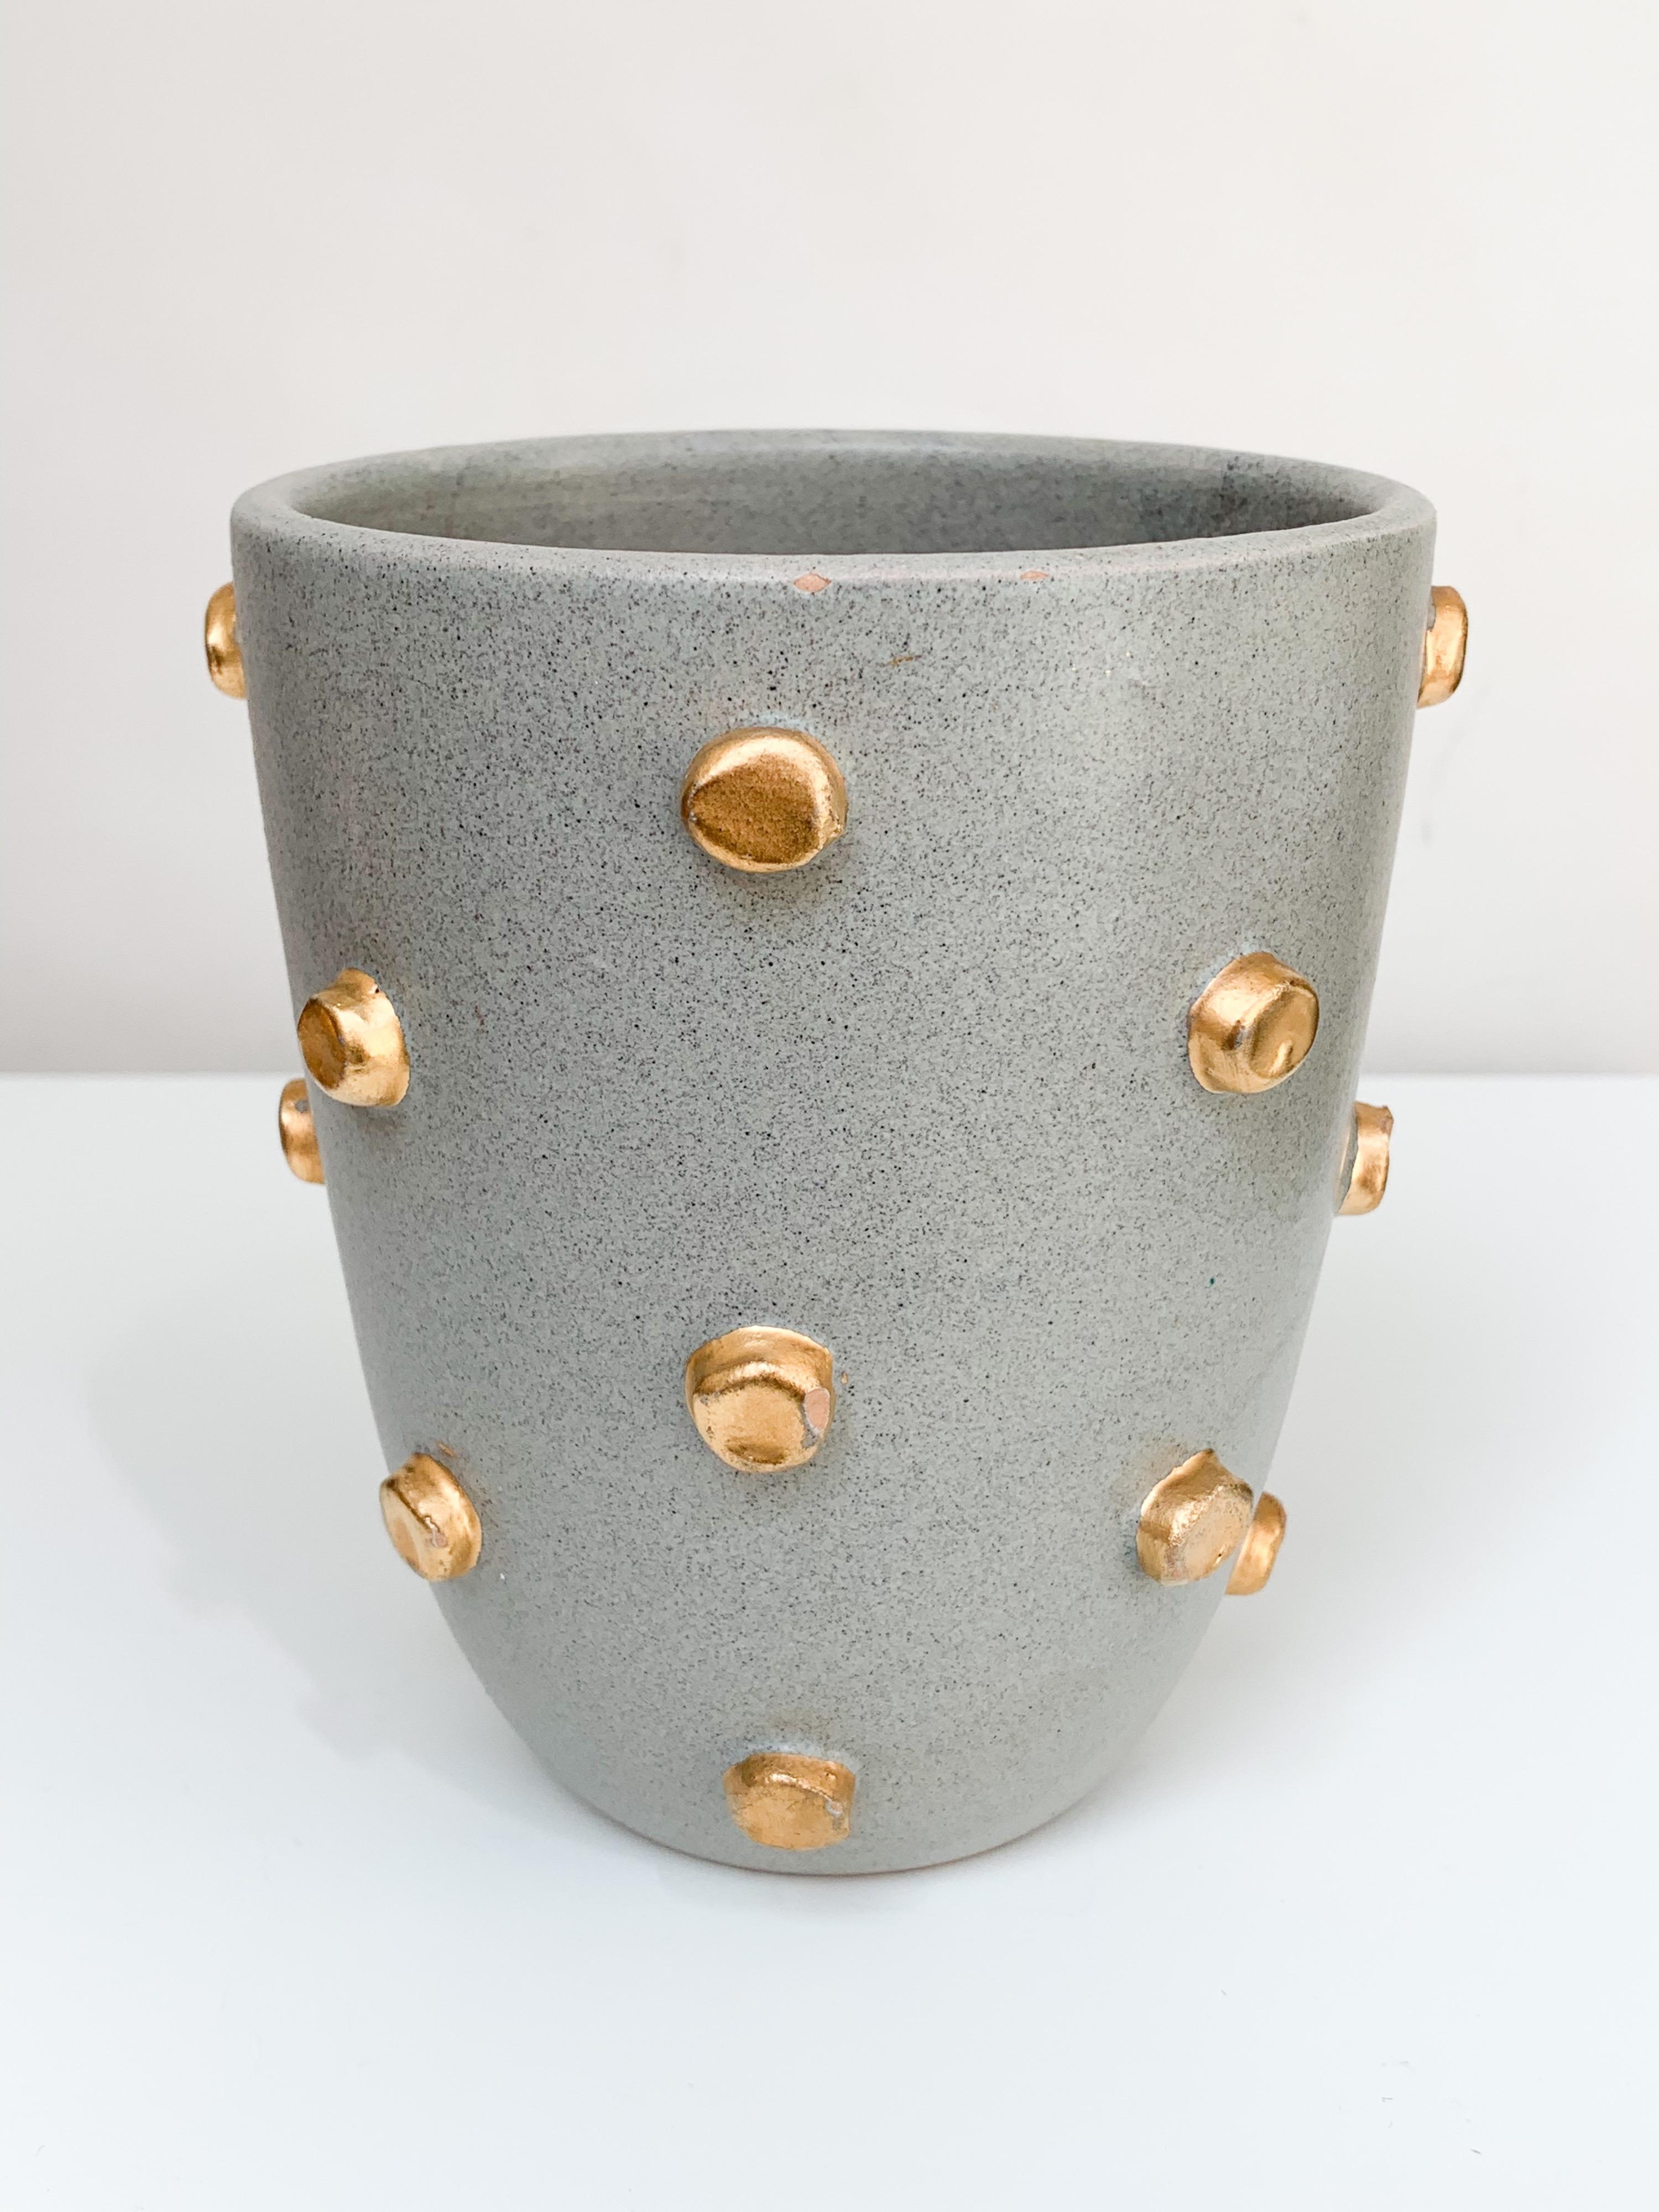 Bitossi vase, ceramic, gray and gold hobnails, signed. Small scale chunky vase with gray glaze and decorated with applied gold hobnails. Vase is marked 95/393 Italy. Measures: 4.75